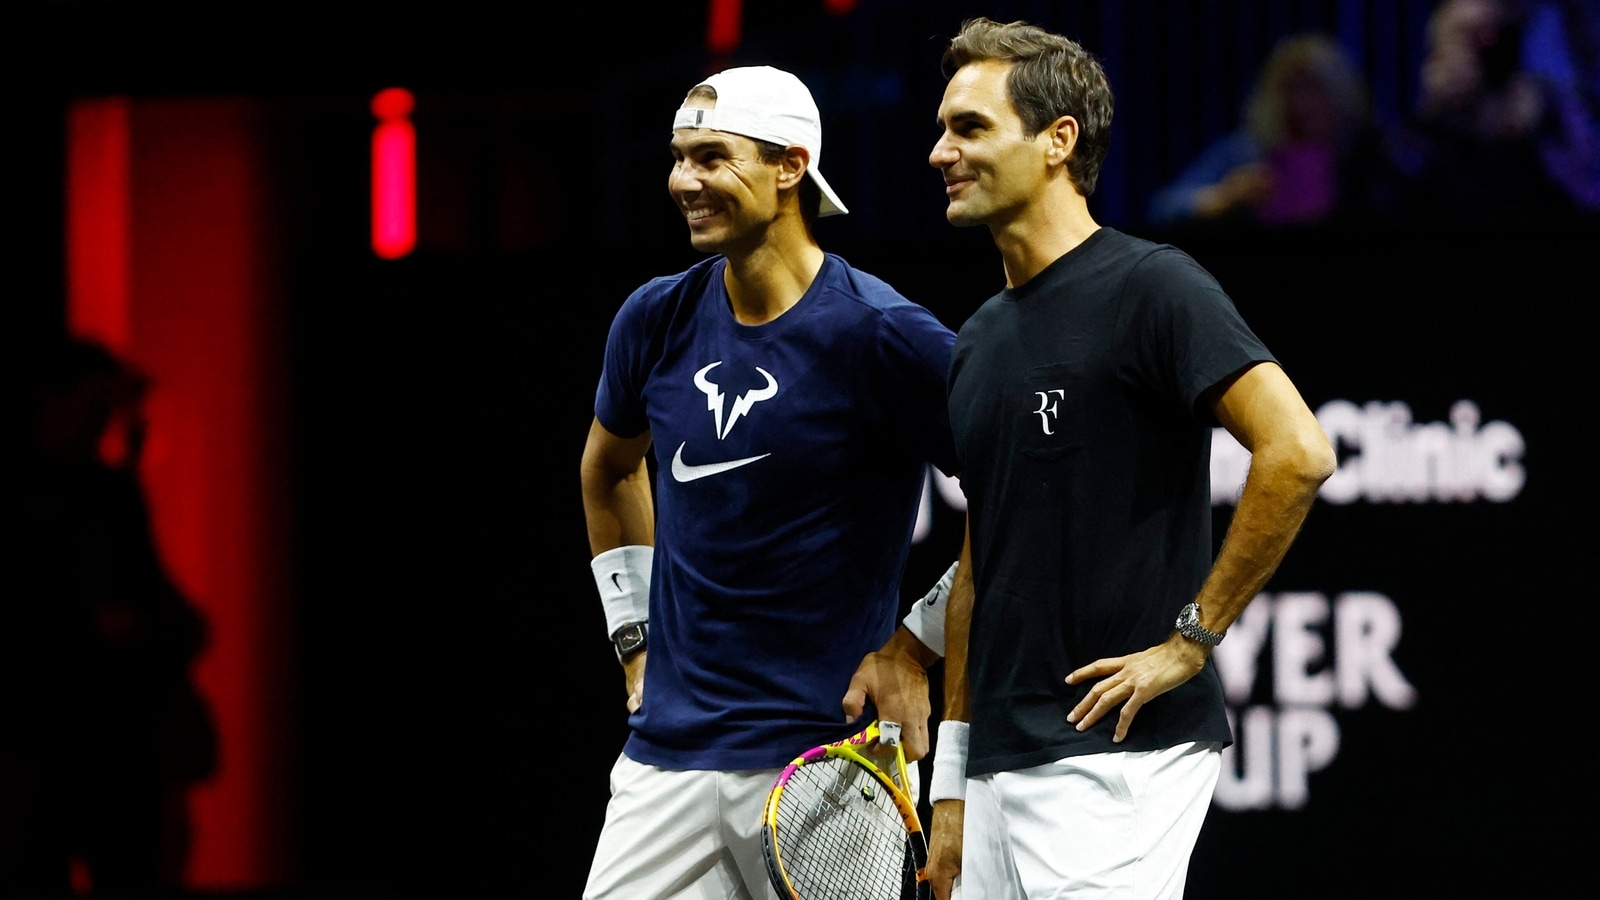 Laver Cup, live streaming When and where to watch Federer and Nadal's